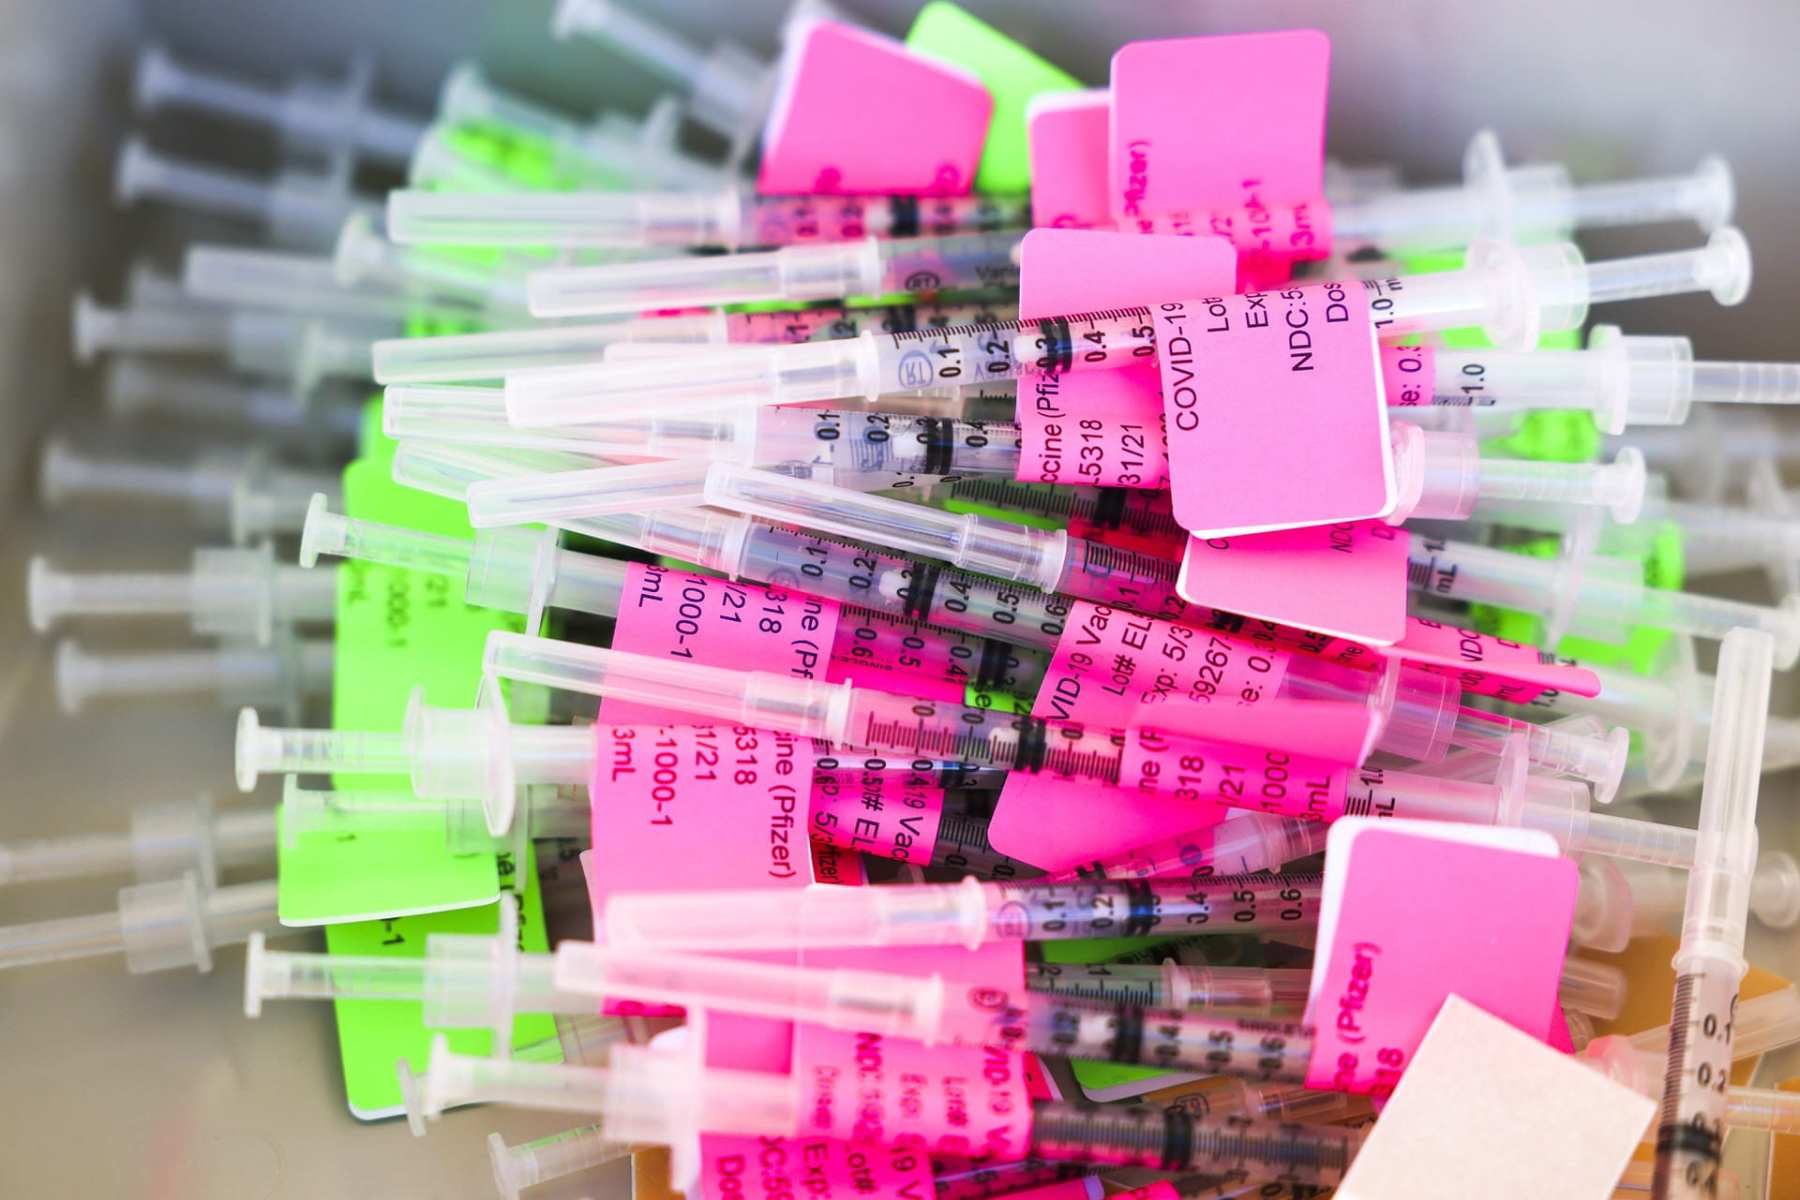 Unused doses of the COVID vaccine in a pile with bright pink and green labels.